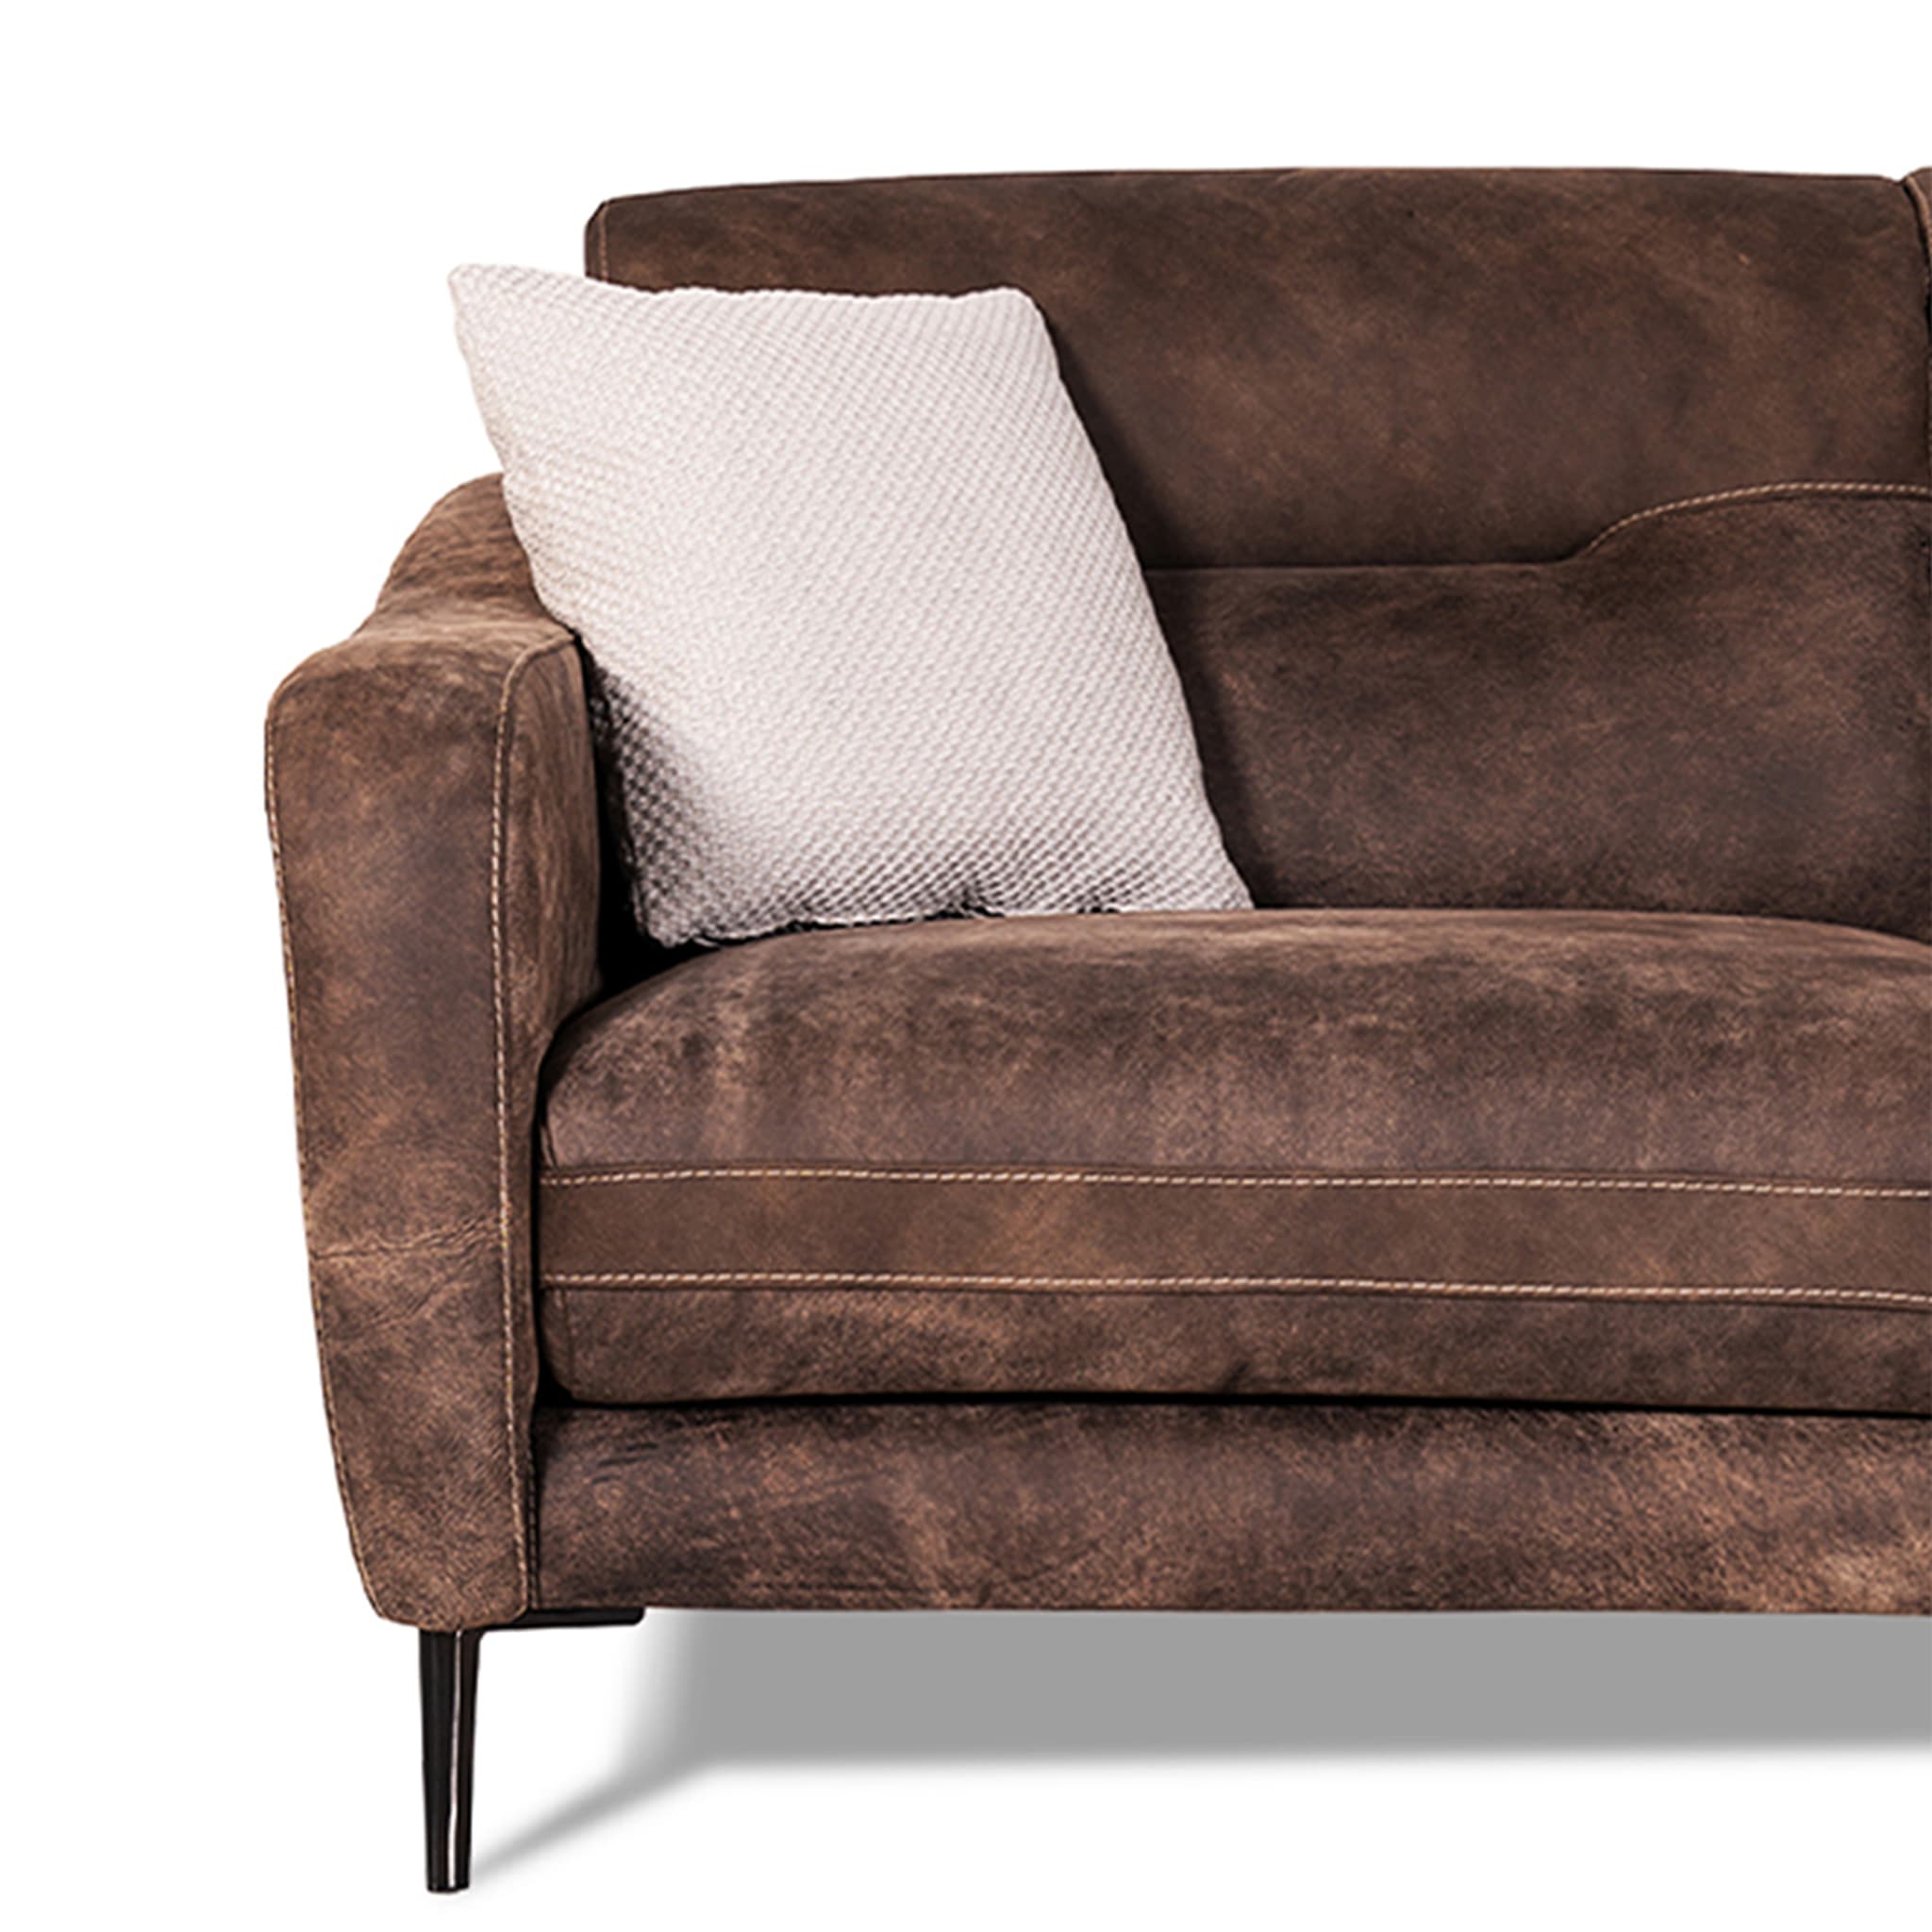 Fonzie Brown Leather 2-Seater Sofa Tribeca Collection - Alternative view 1